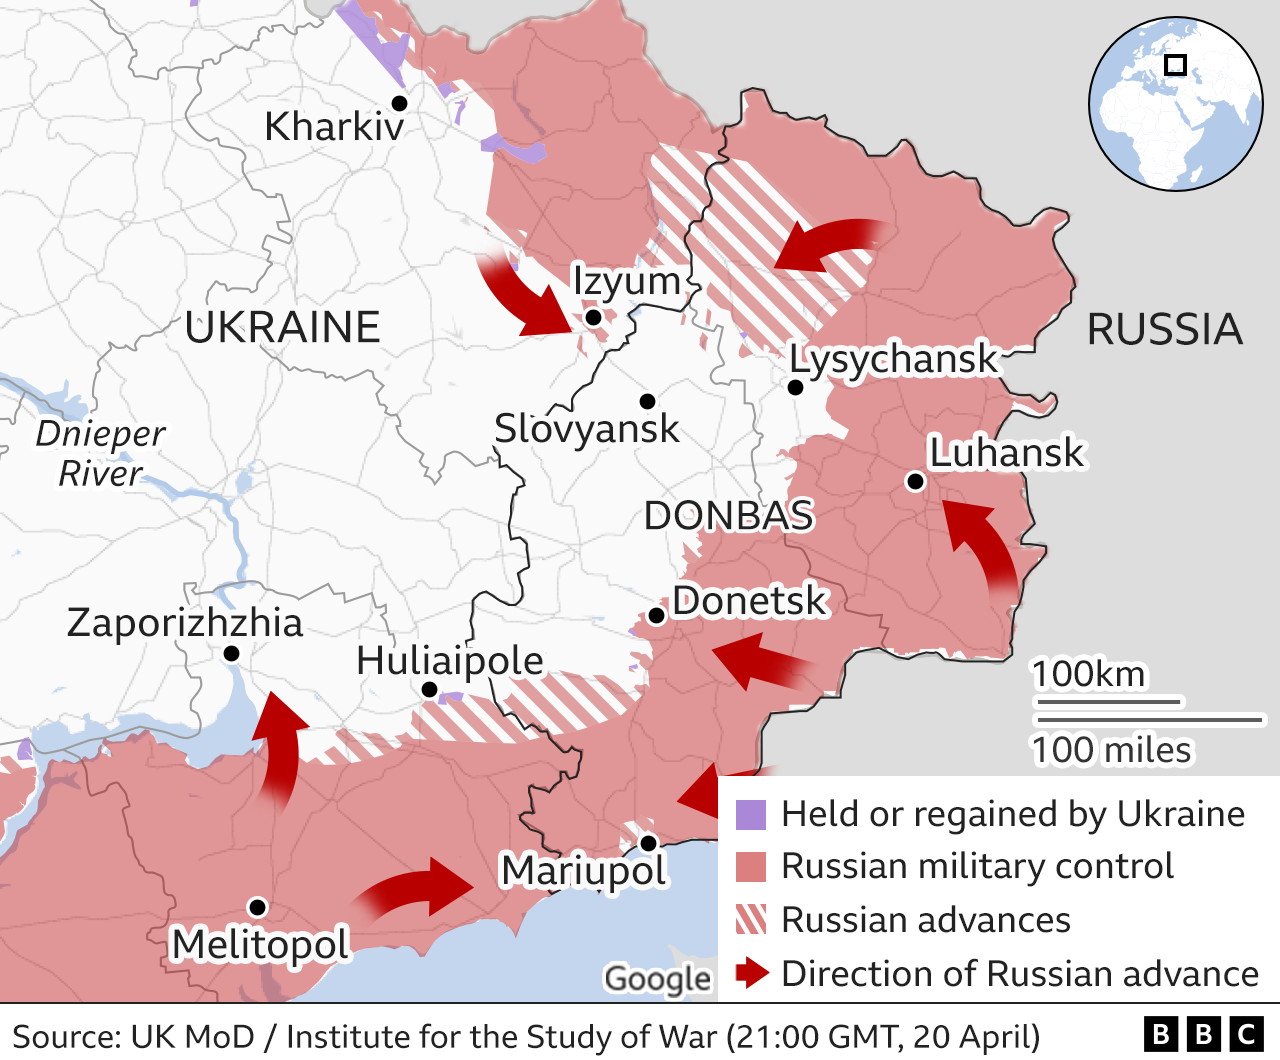 Map showing the Russian military advance into Ukraine from the east